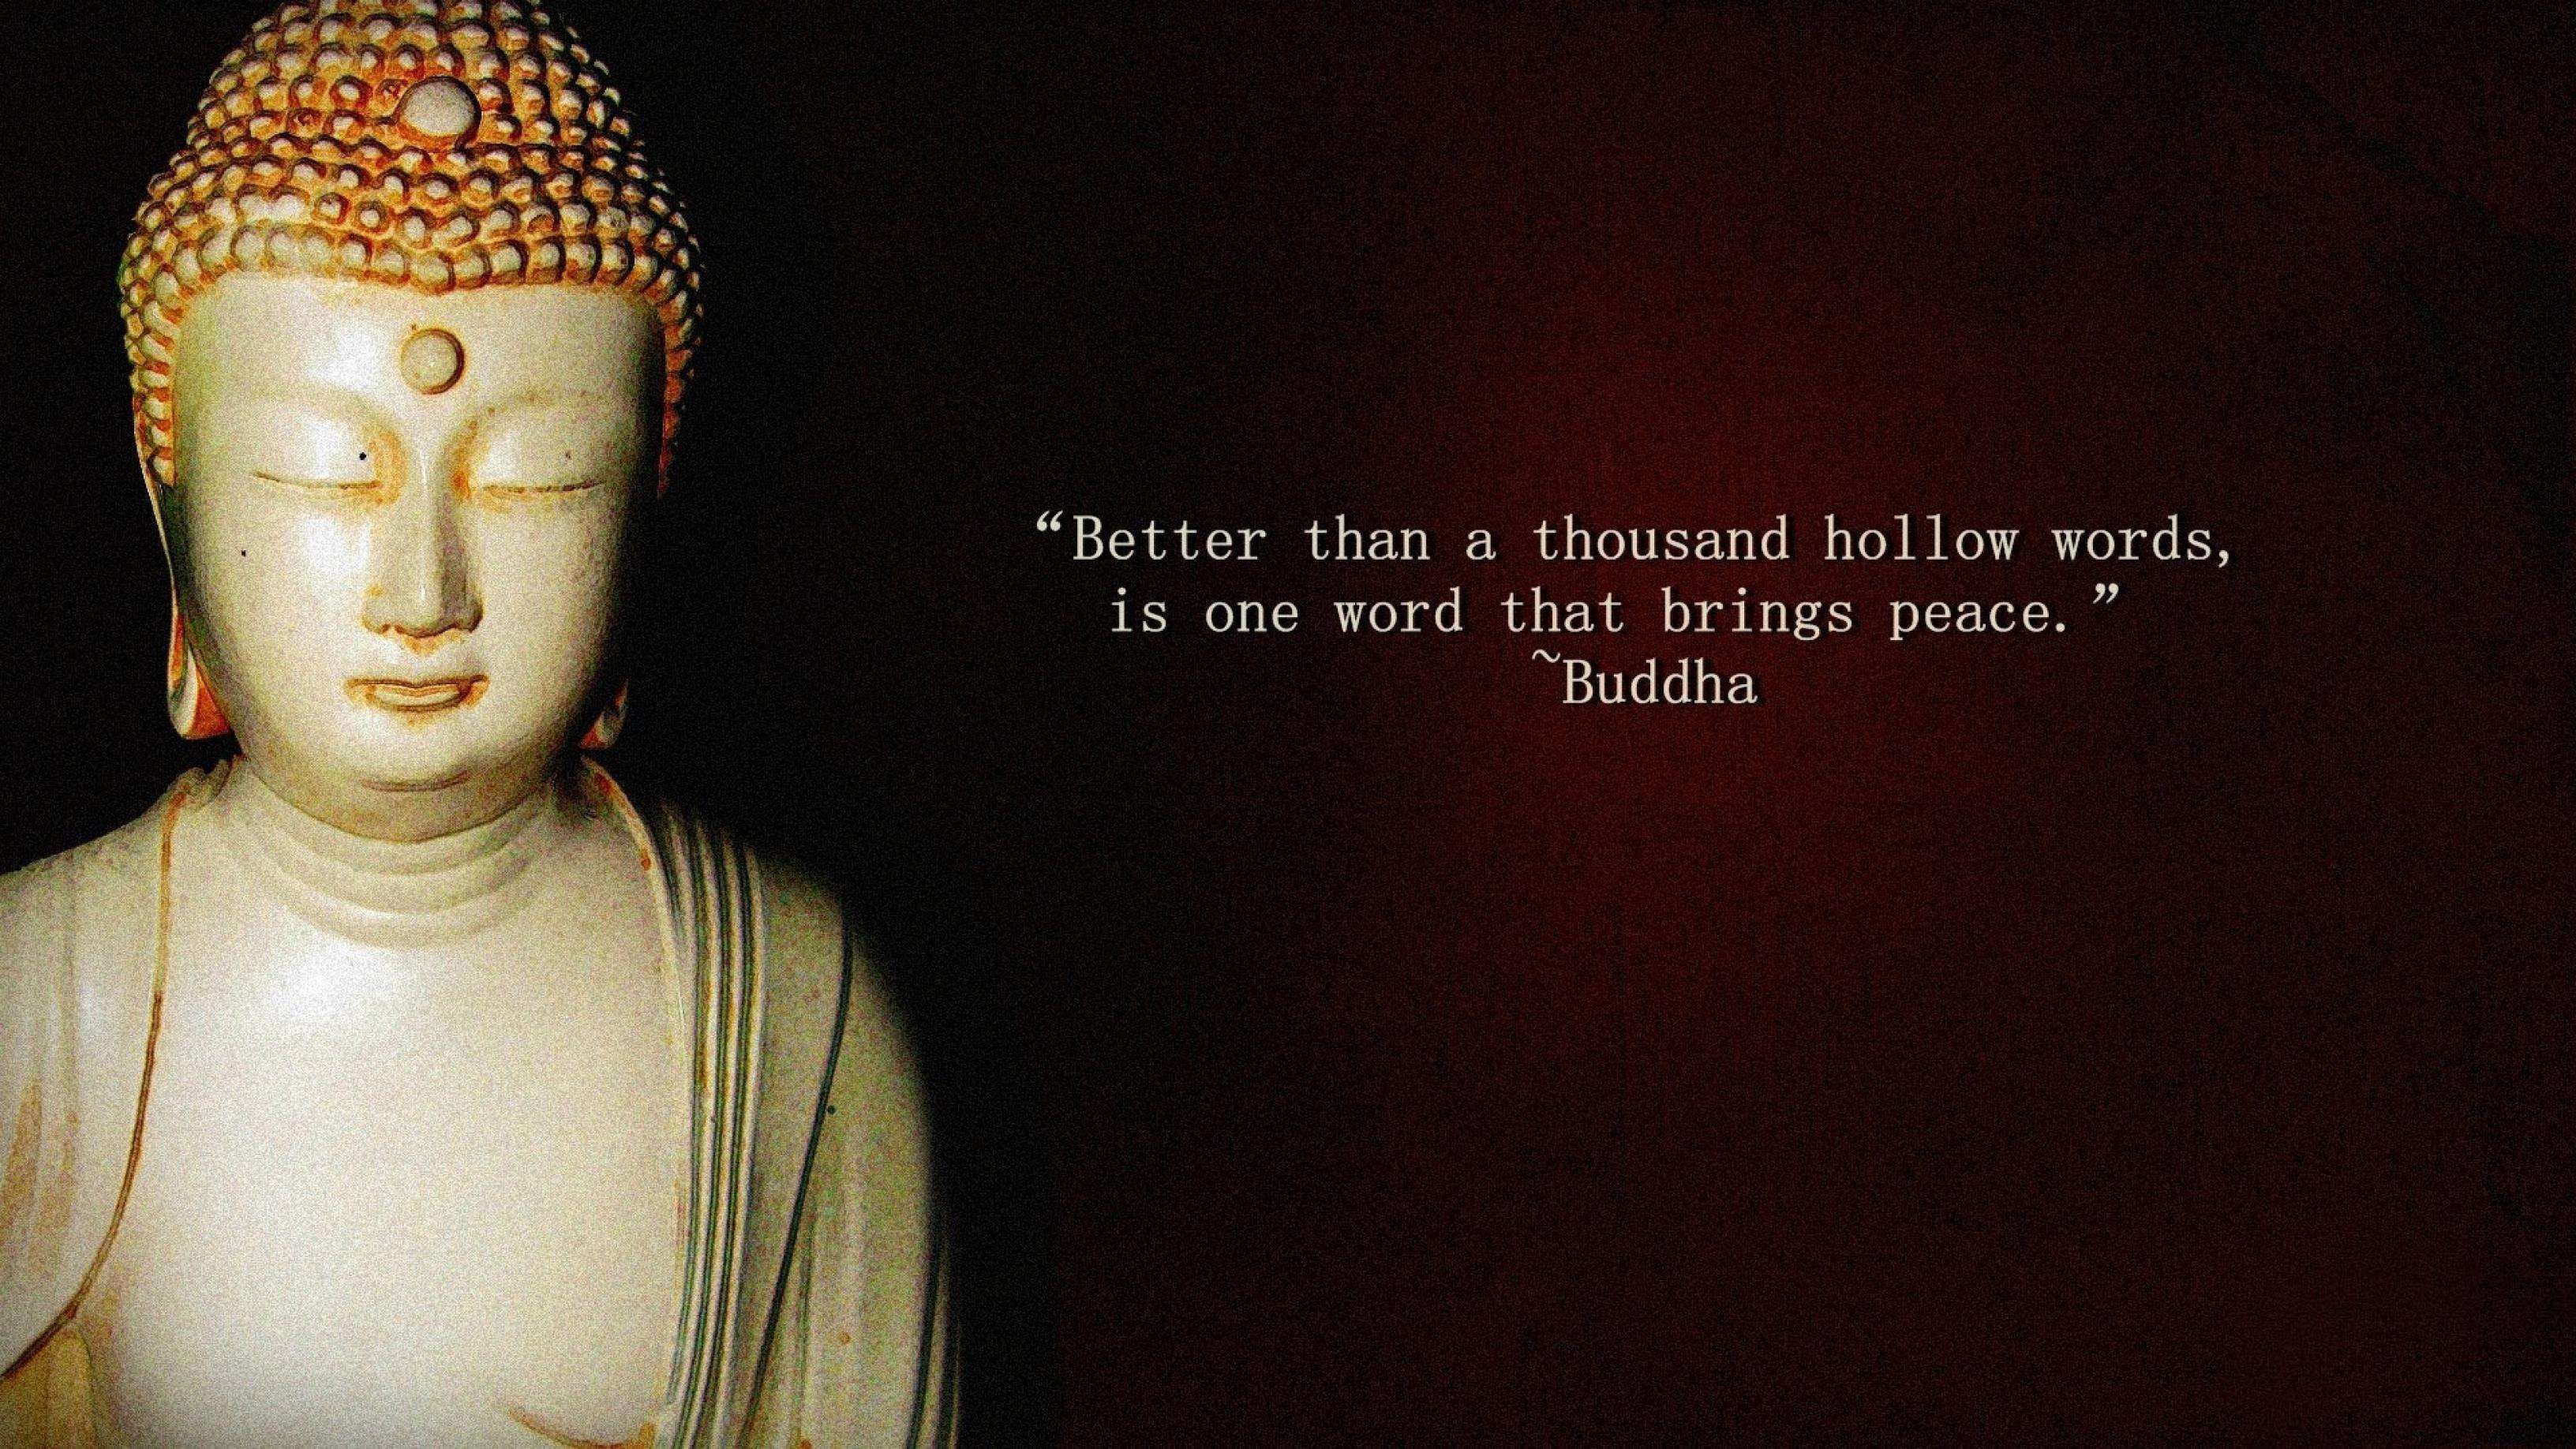 Budhha Quote HD pics for whatsapp group | Inspirational and ...